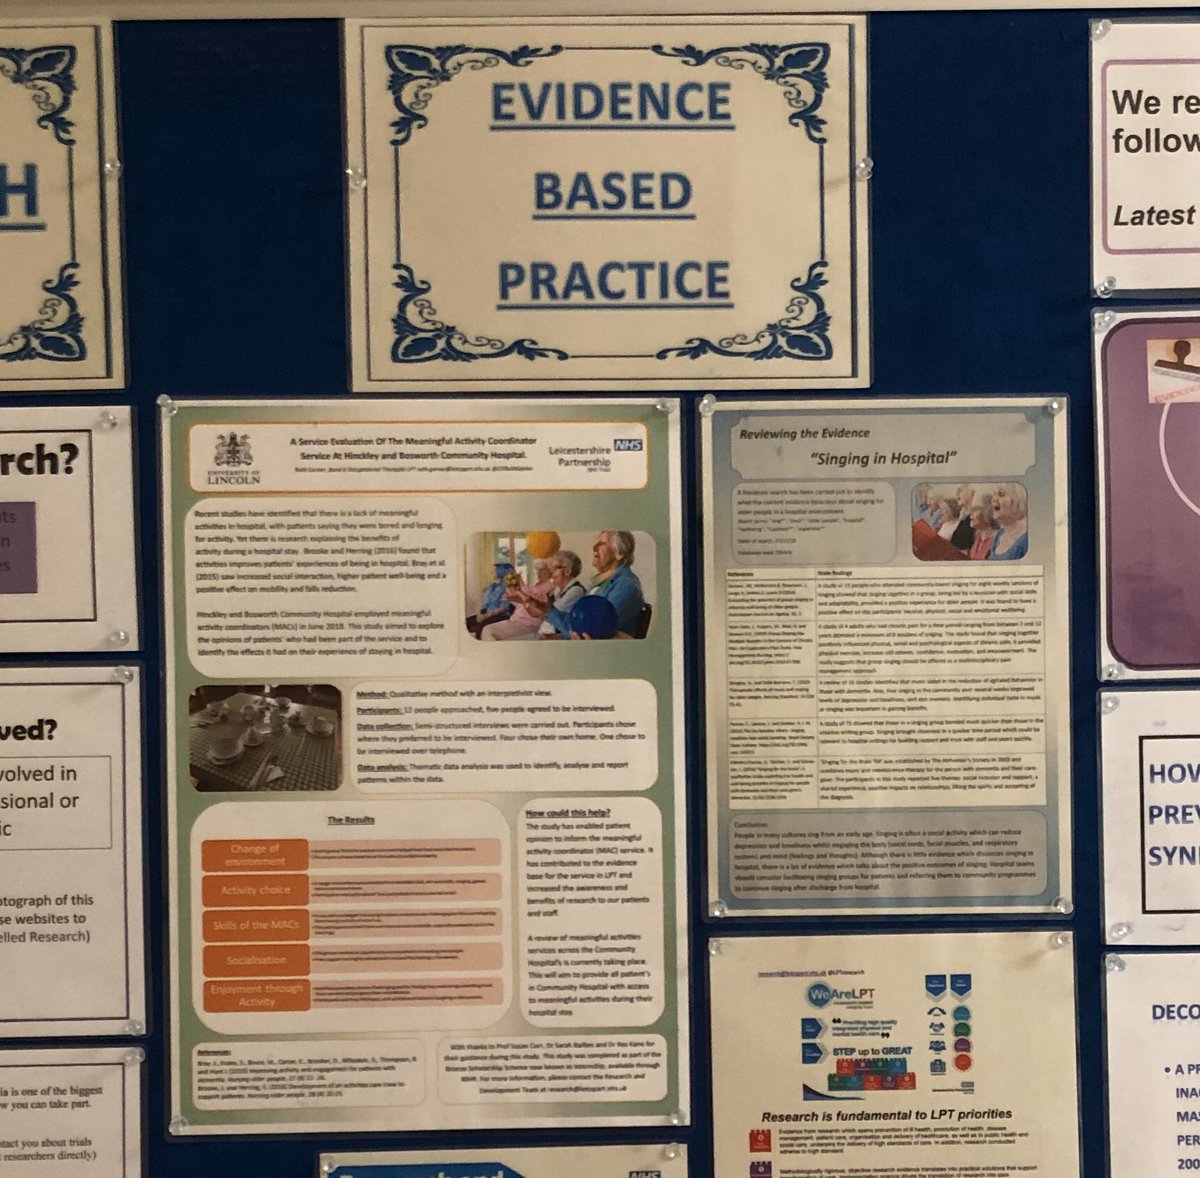 displaying evidence based research by @OTRuthGarner on meaningful activity coordinators & how meaningful activities help to improve our patients wellbeing during their stay on our wards @CMJPeart @leawarden @skashton @SueWyburn @NikkiBeacher @LPTpatientexp @CHSInpatientLPT